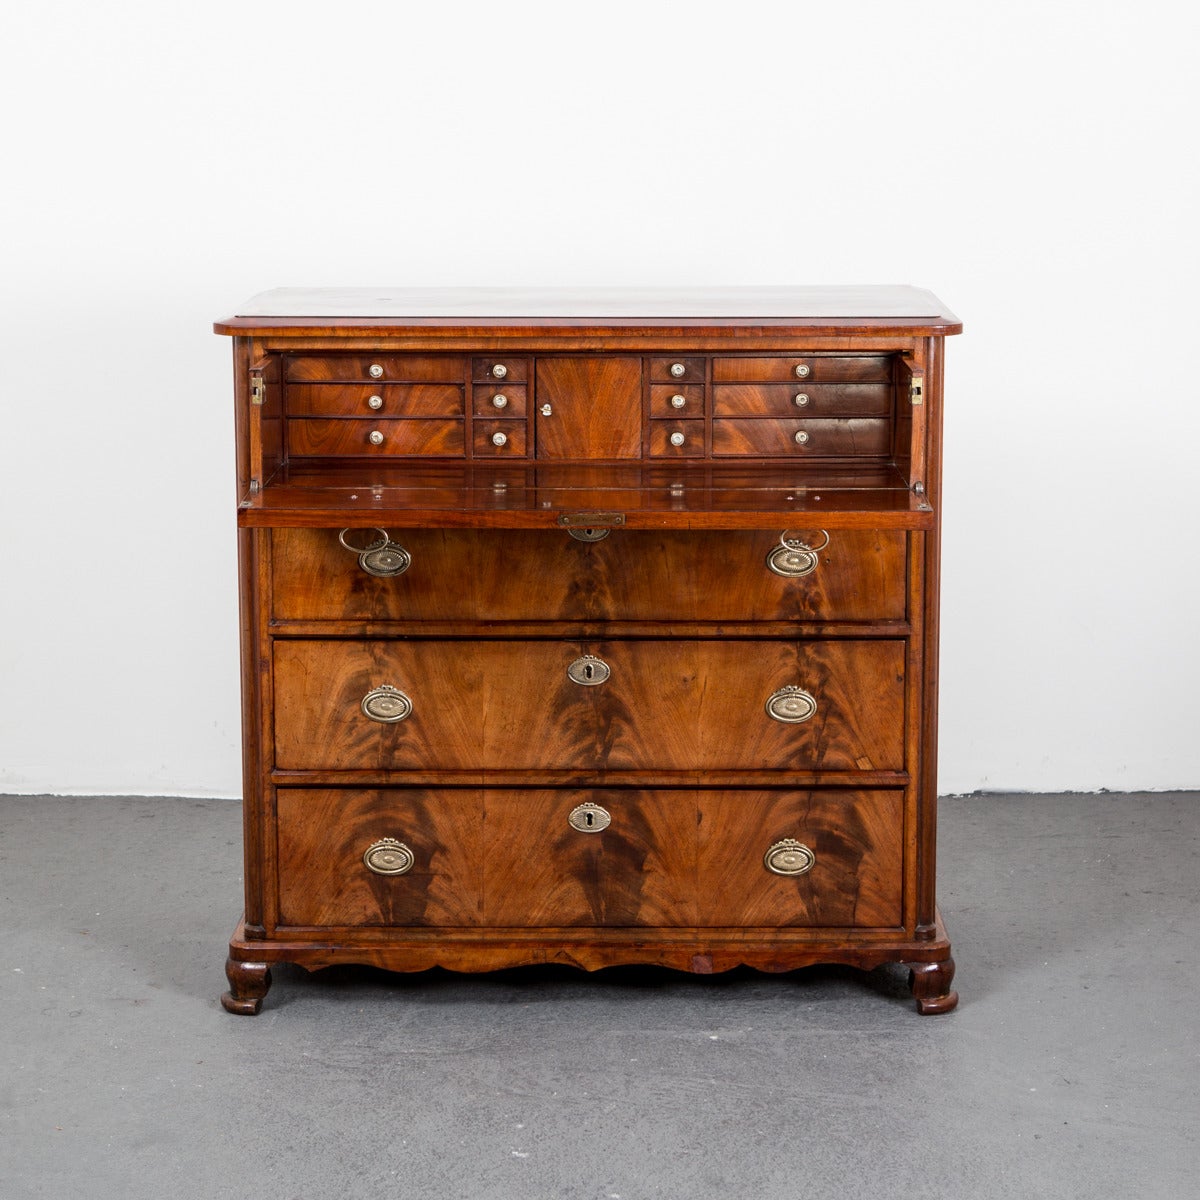 A chest top drawer extendable to a writing desk. Made in Sweden during the late Karl Johan period 1810-1830.